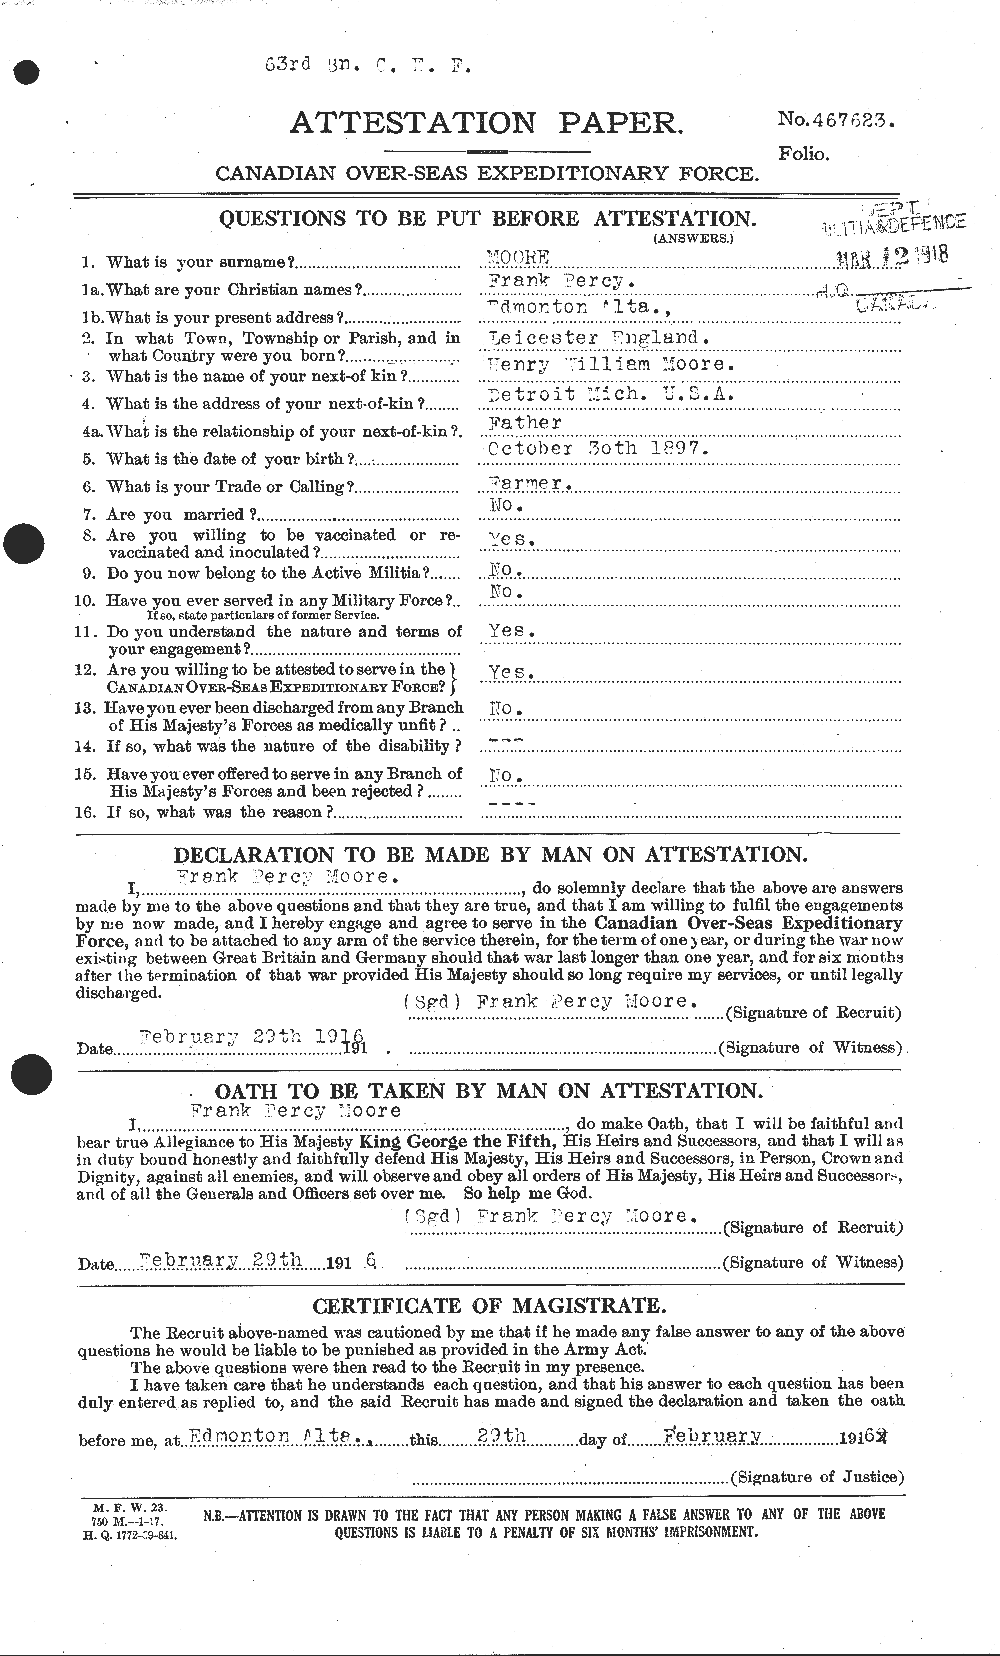 Personnel Records of the First World War - CEF 506710a